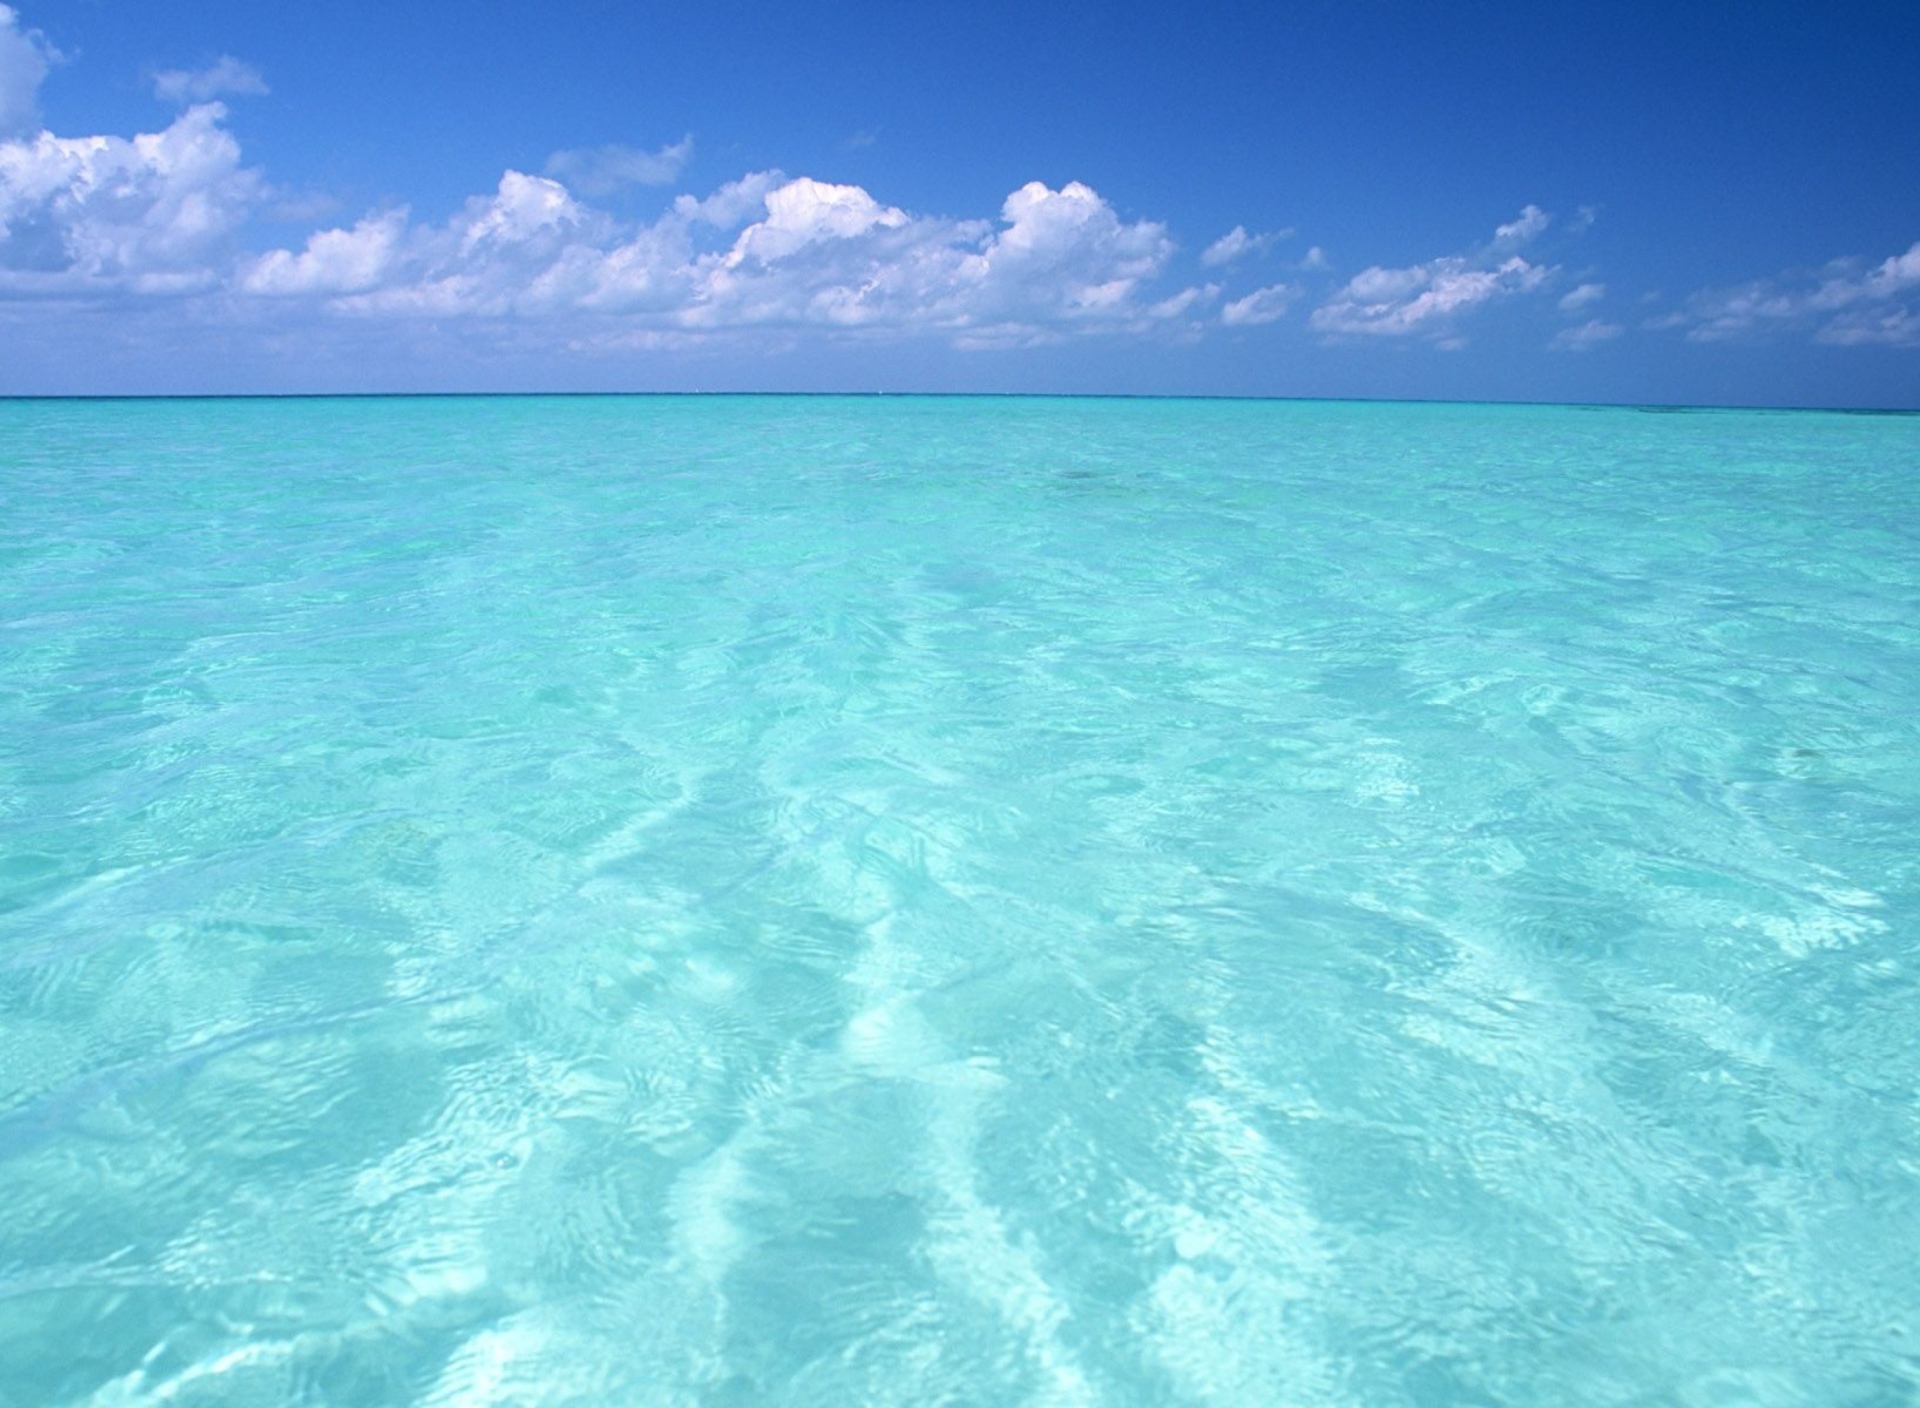 Das Teal Water And Blue Sky Wallpaper 1920x1408